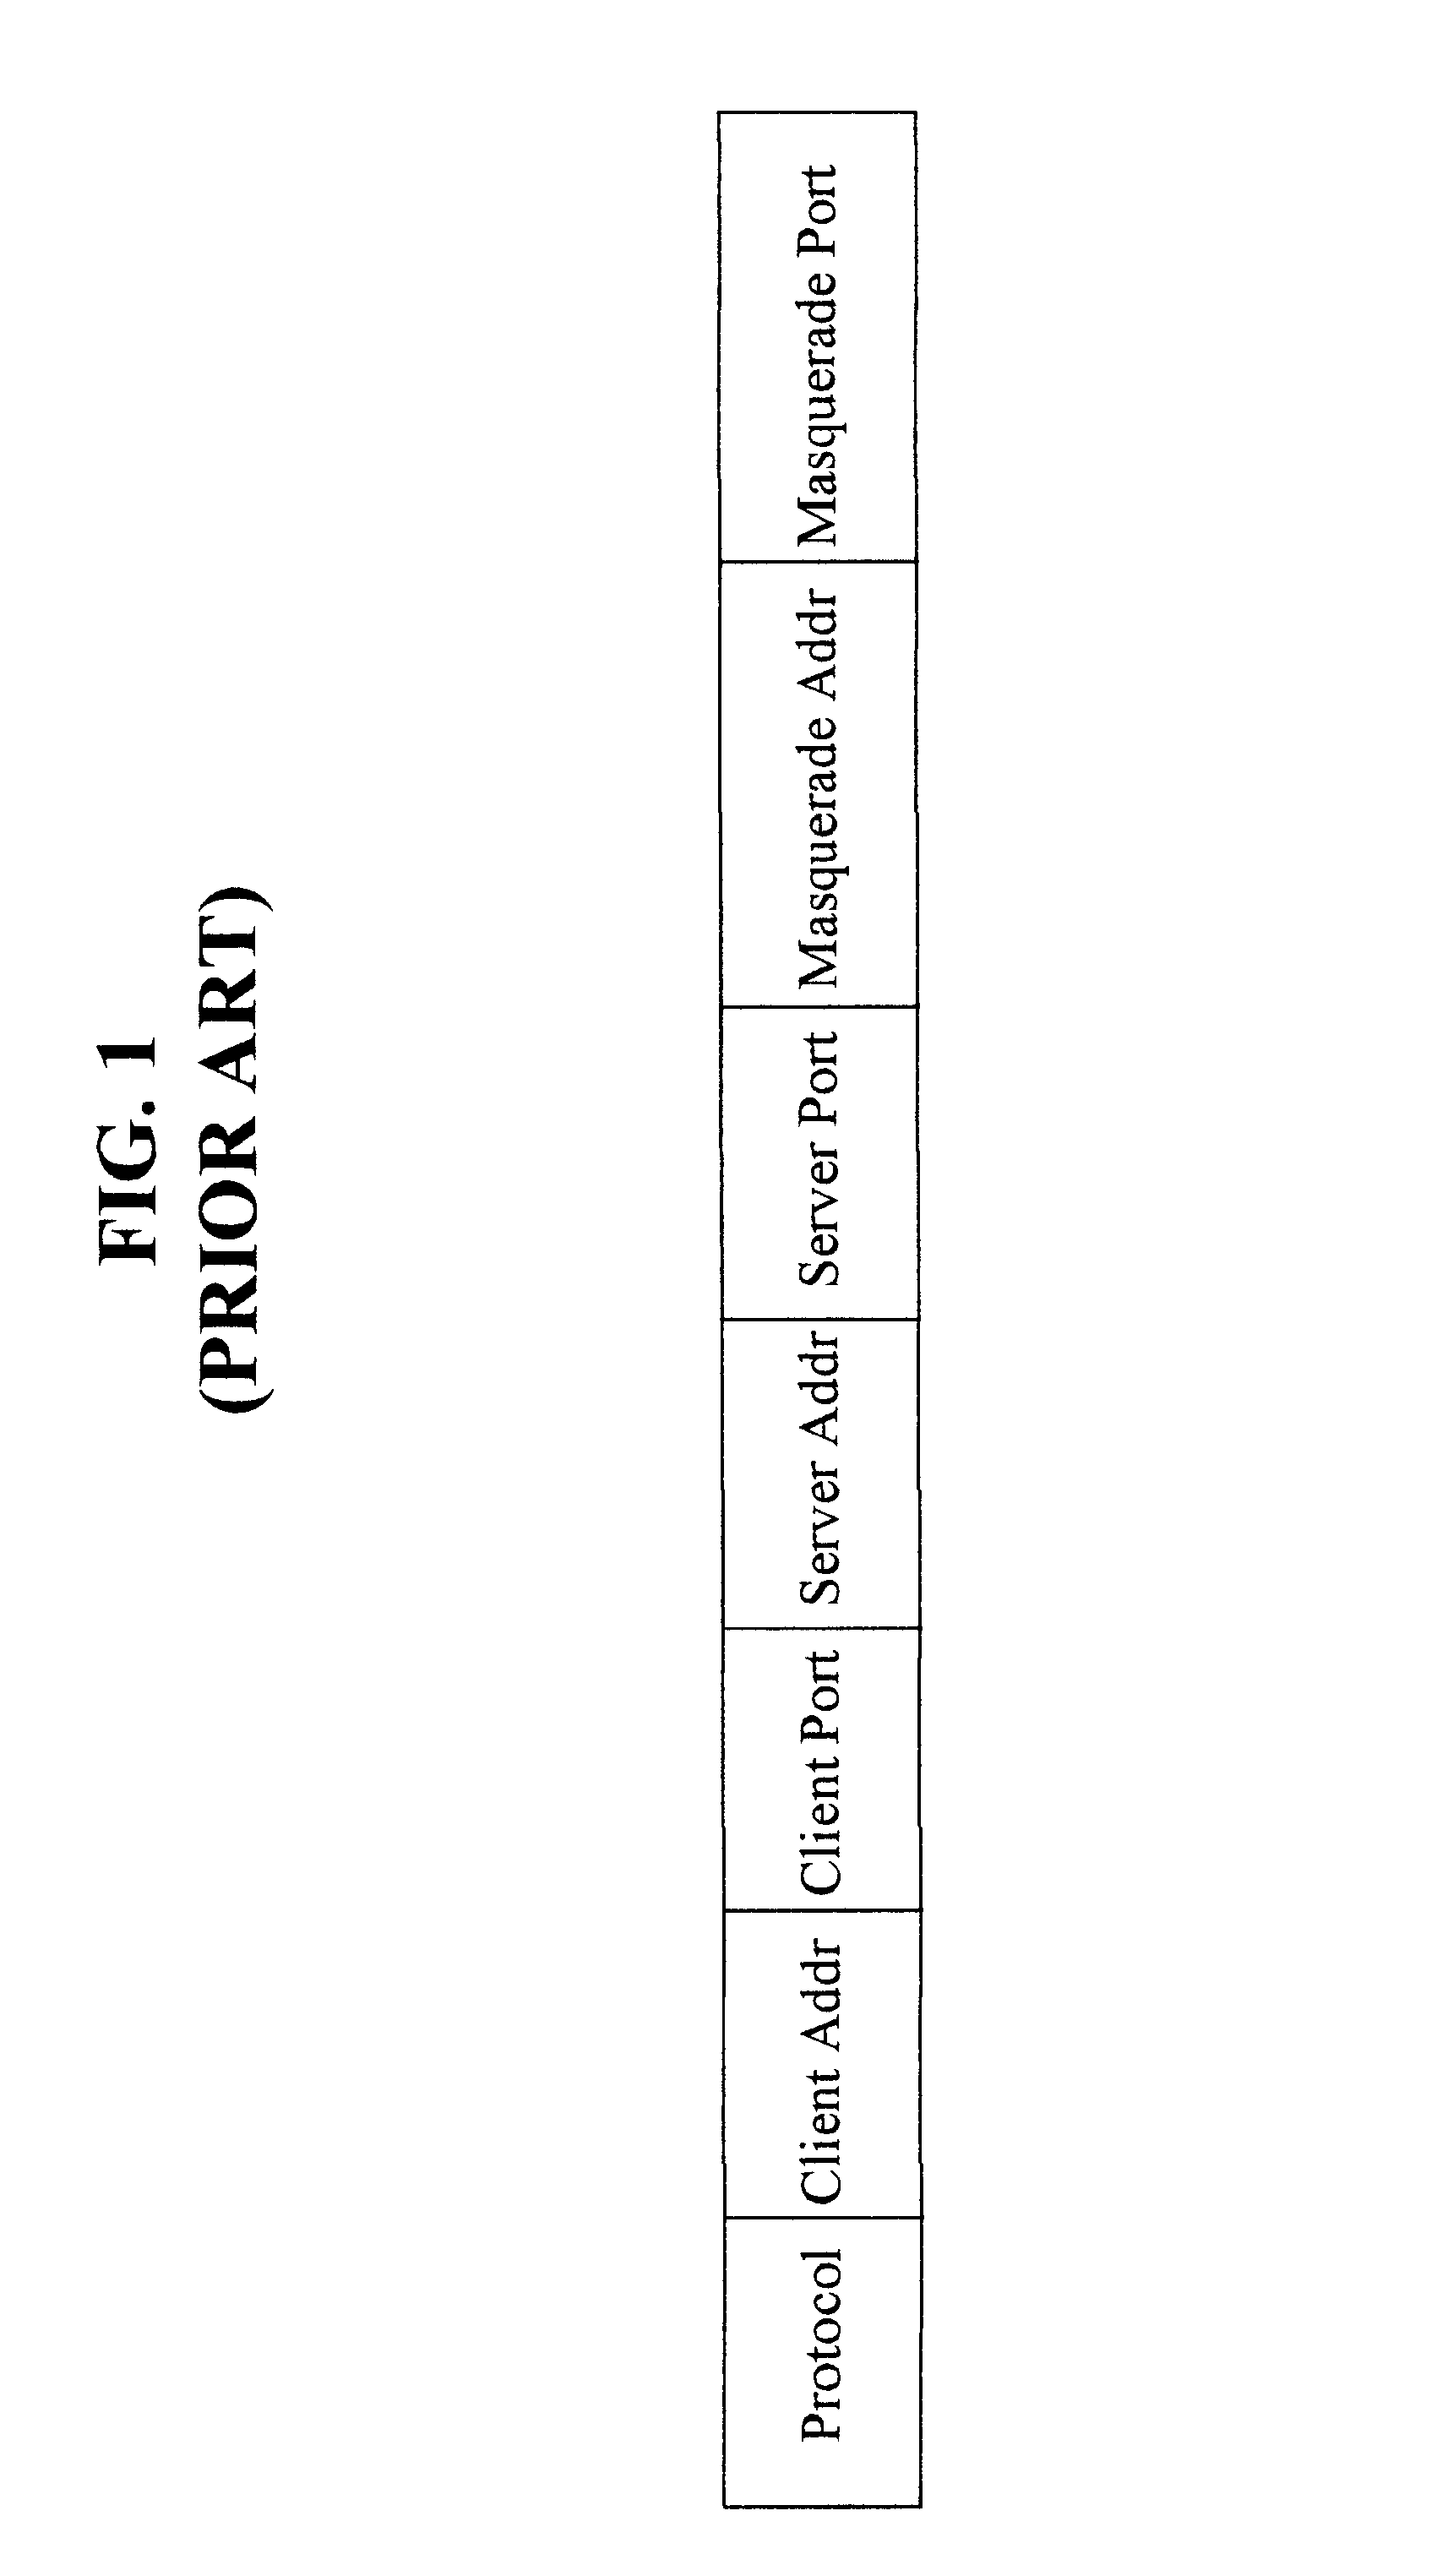 Providing secure network access for short-range wireless computing devices